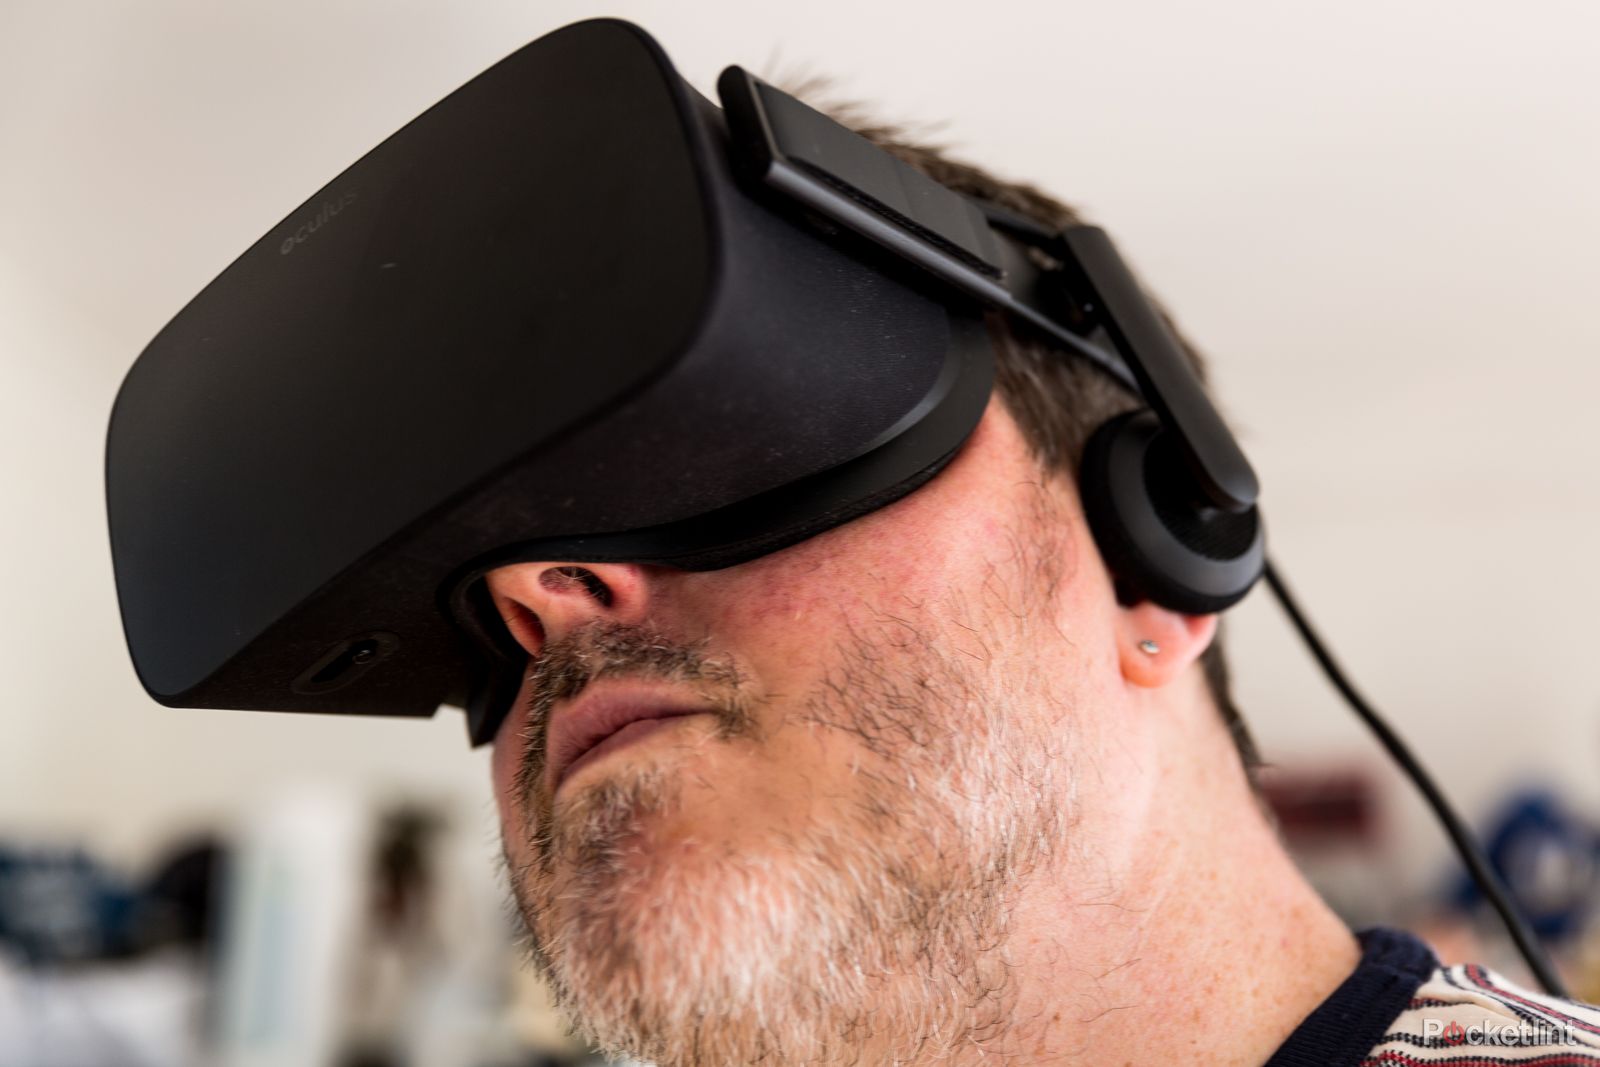 oculus rift review image 12